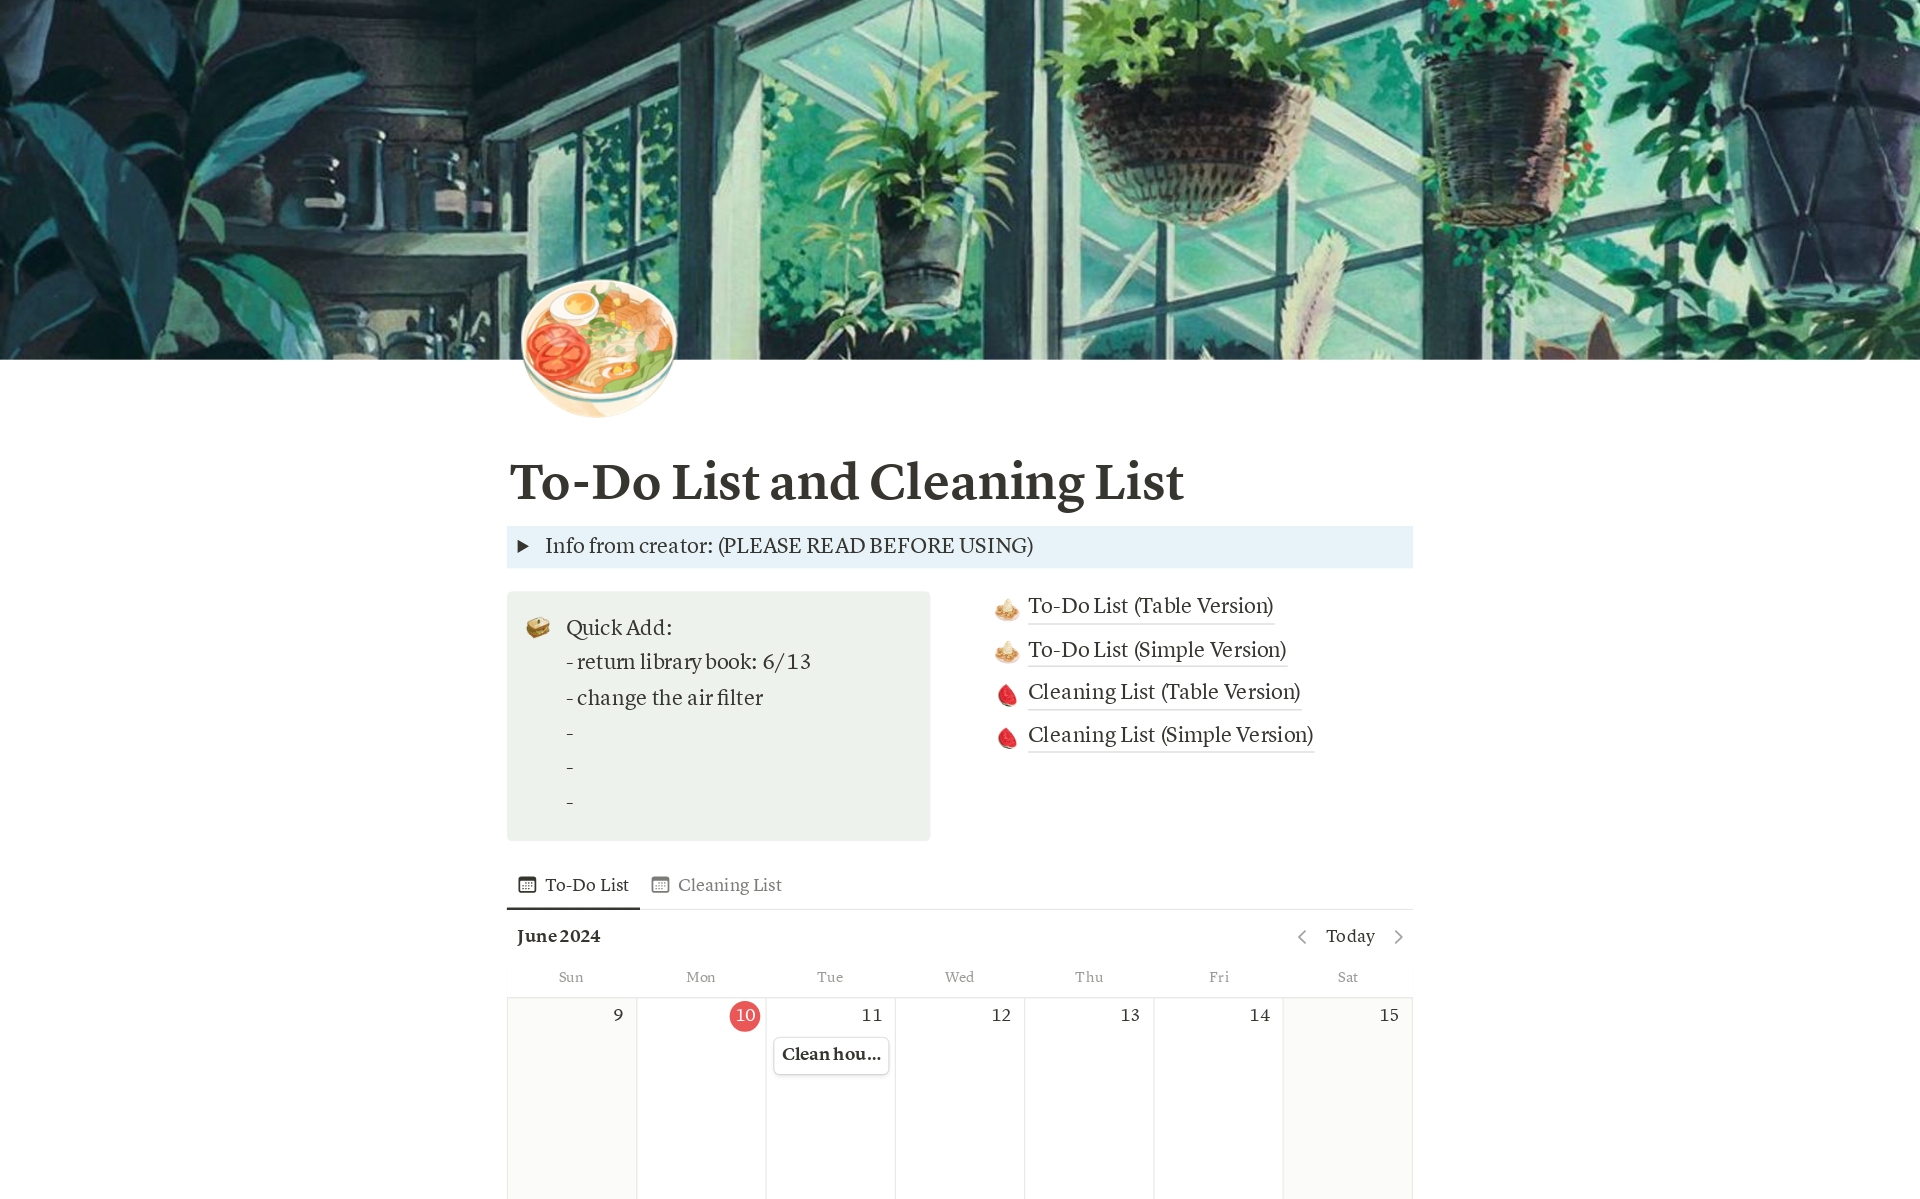 A place for all your lists!
Examples: To-do list, shopping list, plant care list, school list, cleaning list, etc.